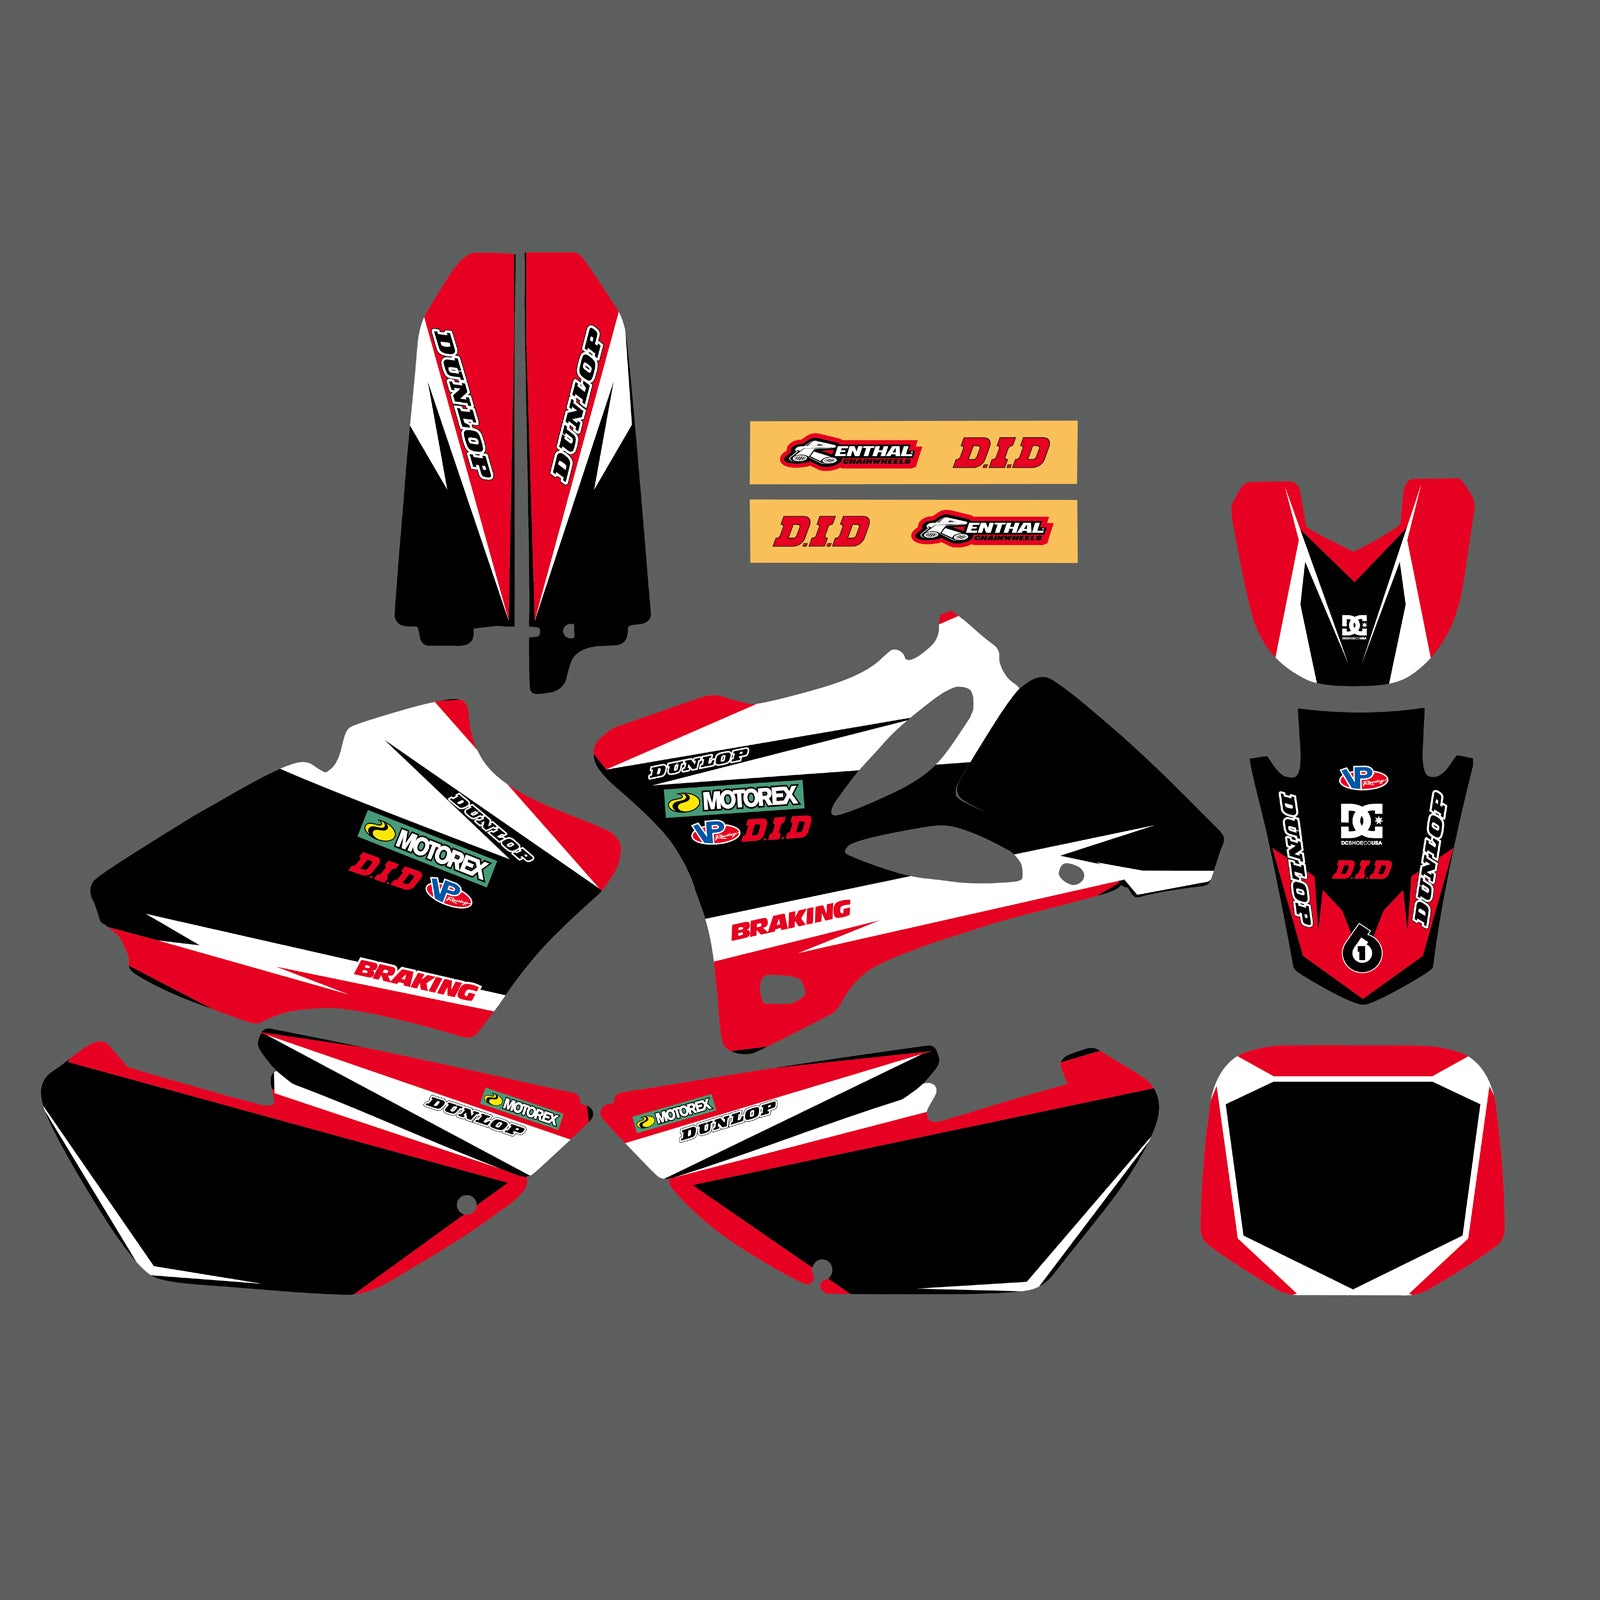 Team Graphics Backgrounds Decals Stickers For Yamaha YZ85 2002-2014